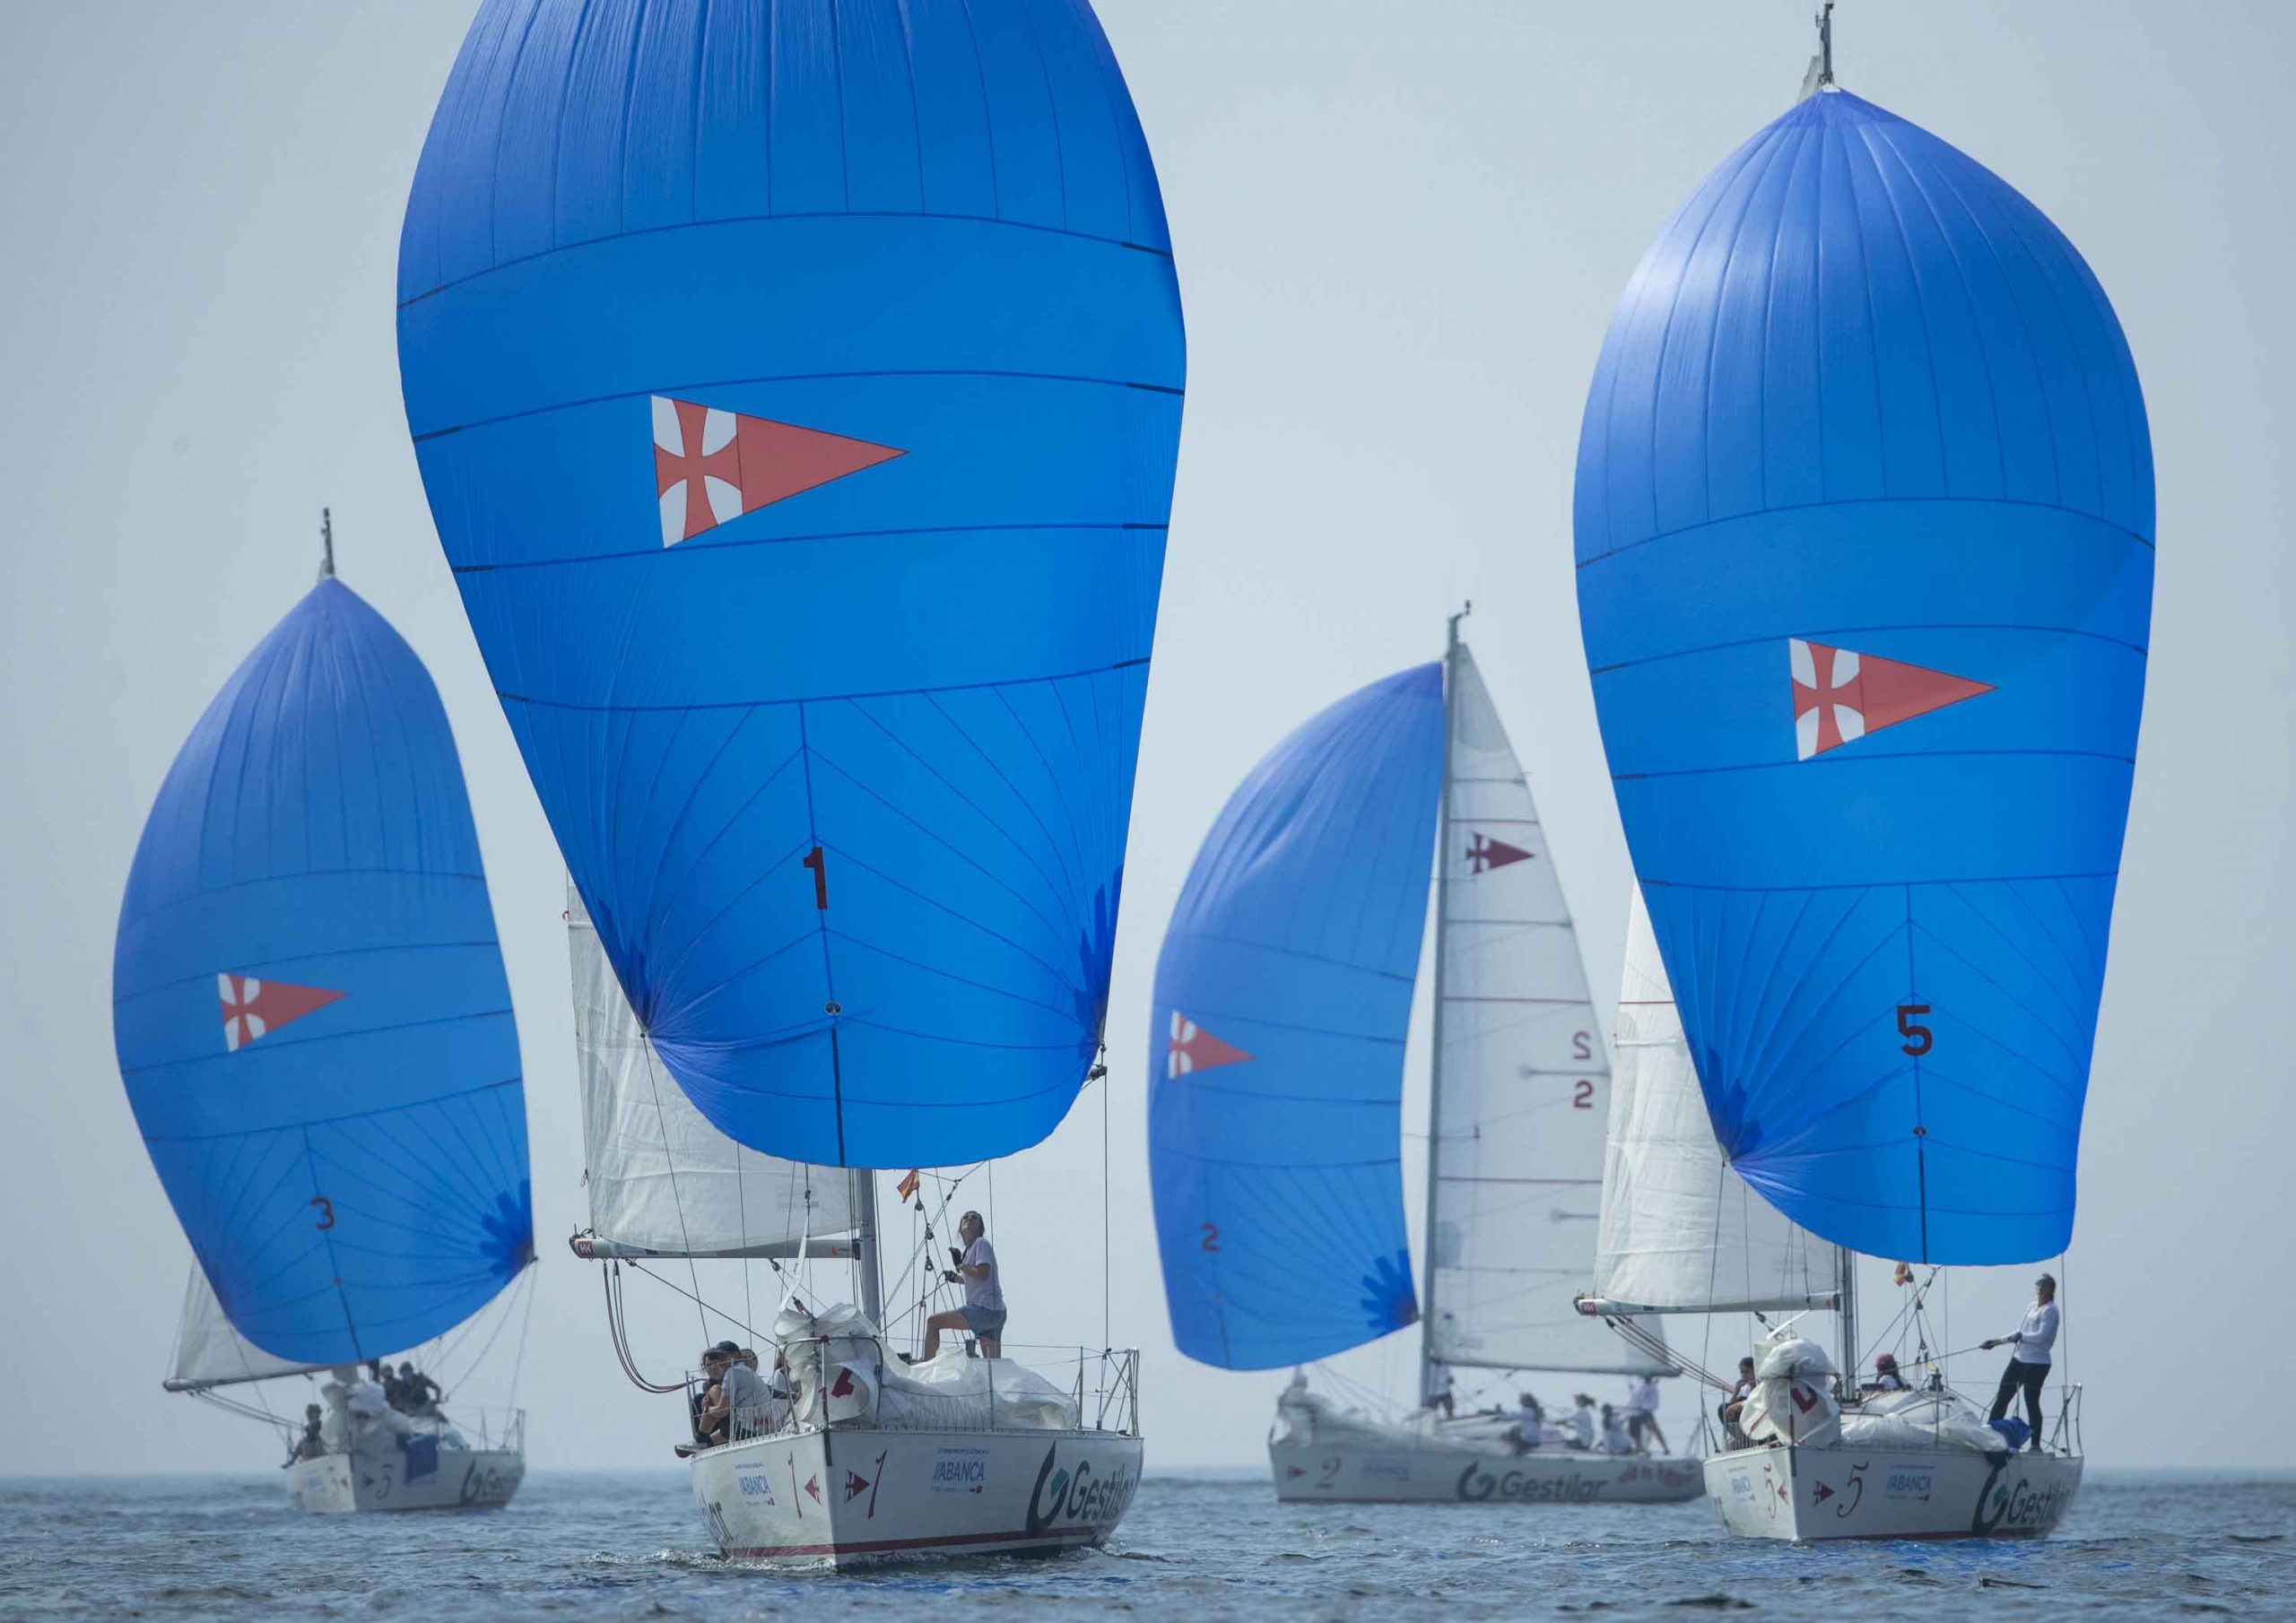 The wind, protagonist in the opening day of the 36th Prince of Asturias Trophy